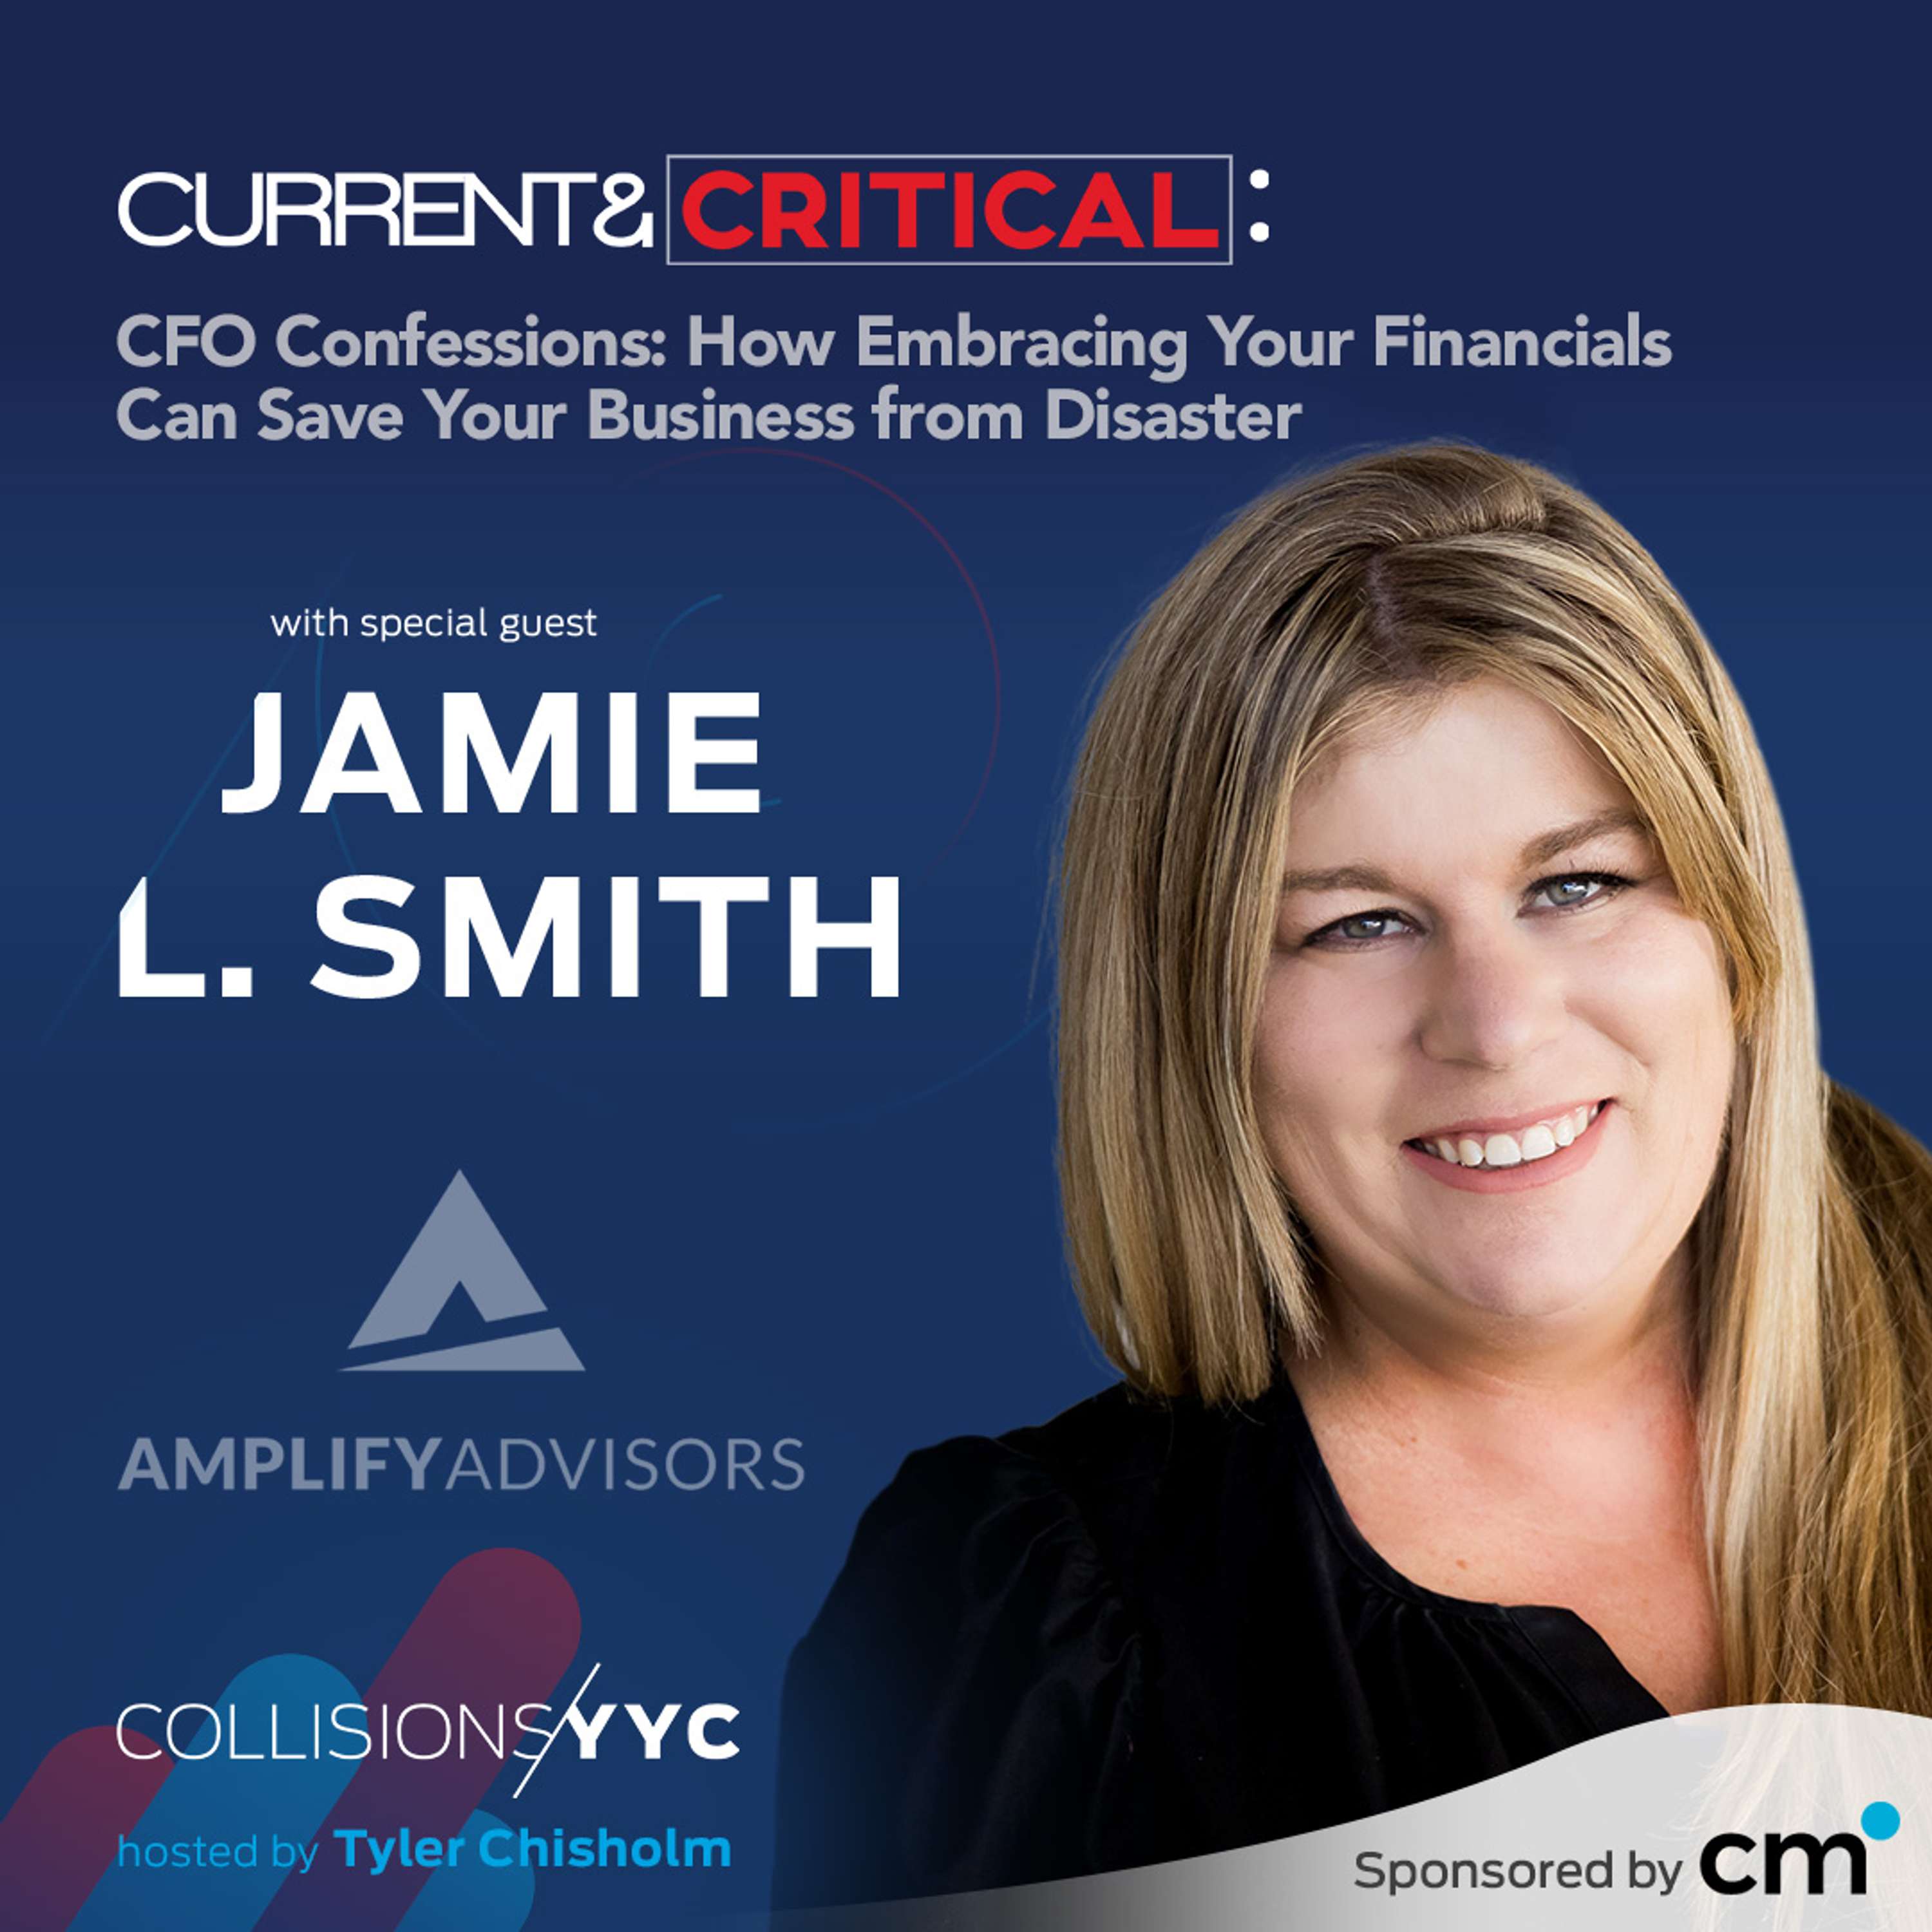 Jamie L. Smith, CFO Confessions: How Embracing Your Financials Can Save Your Business from Disaster